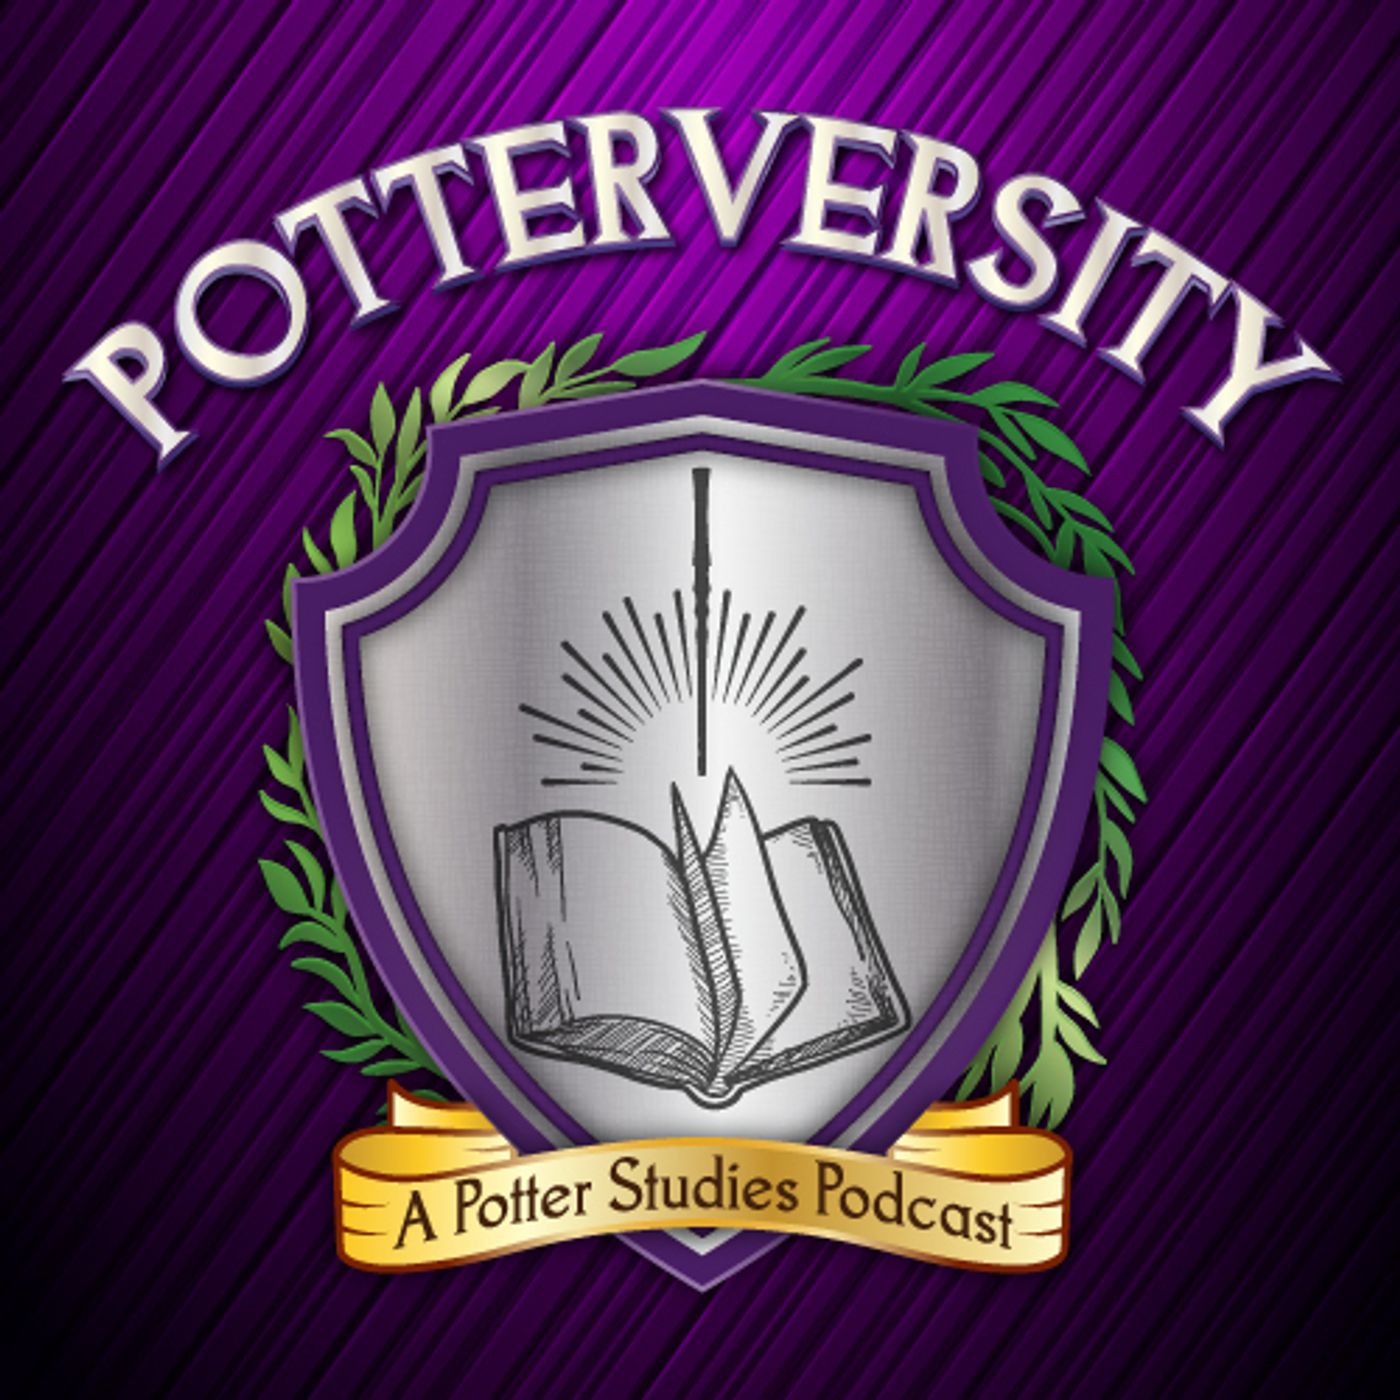 Potterversity Episode 13: Don't Know Much About . . . Arithmancy